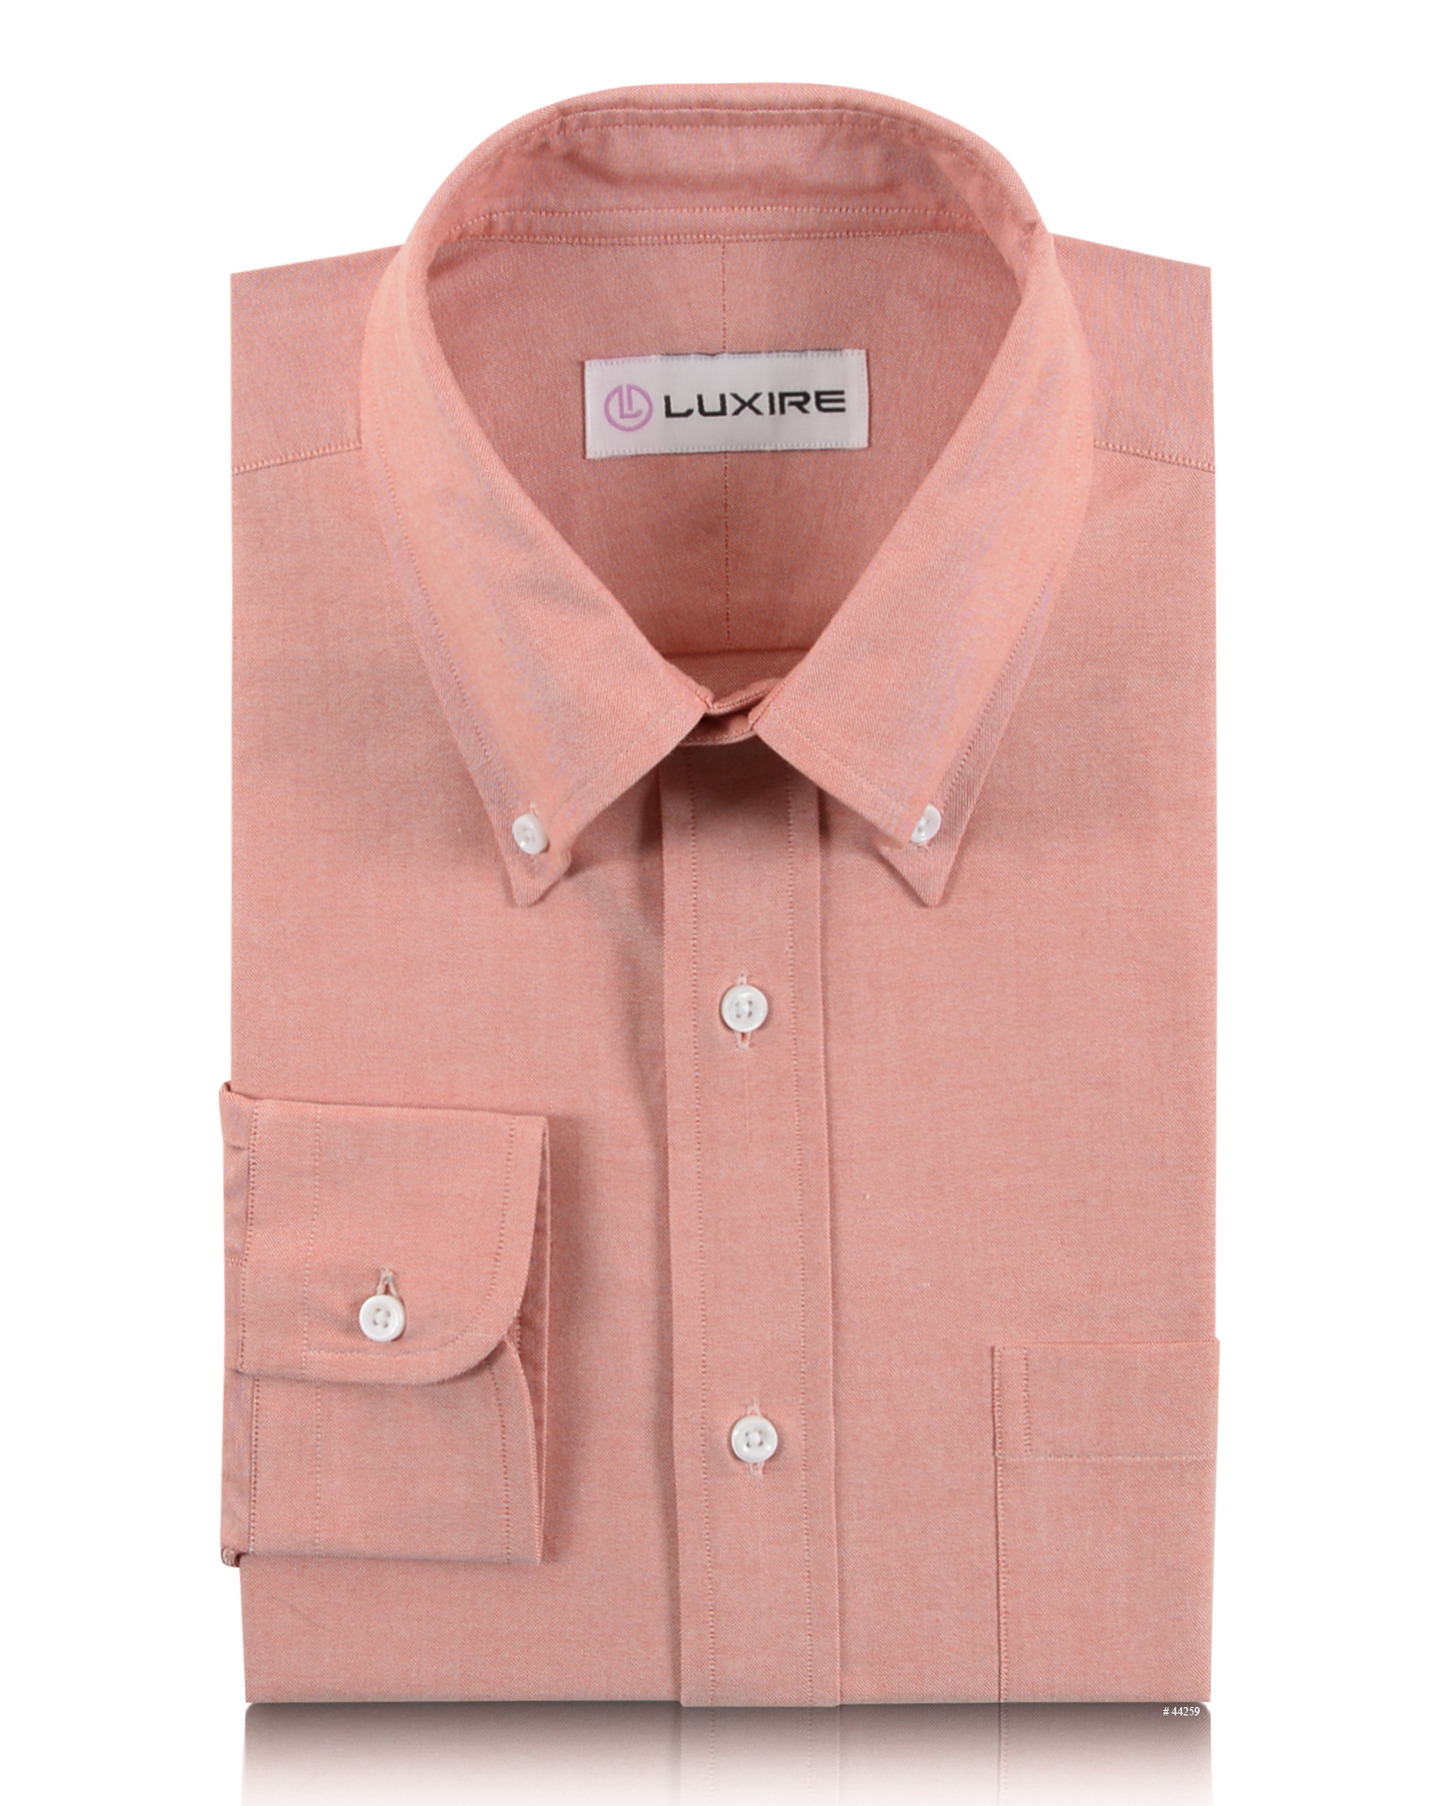 Front of the custom oxford shirt for men by Luxire in reddish orange